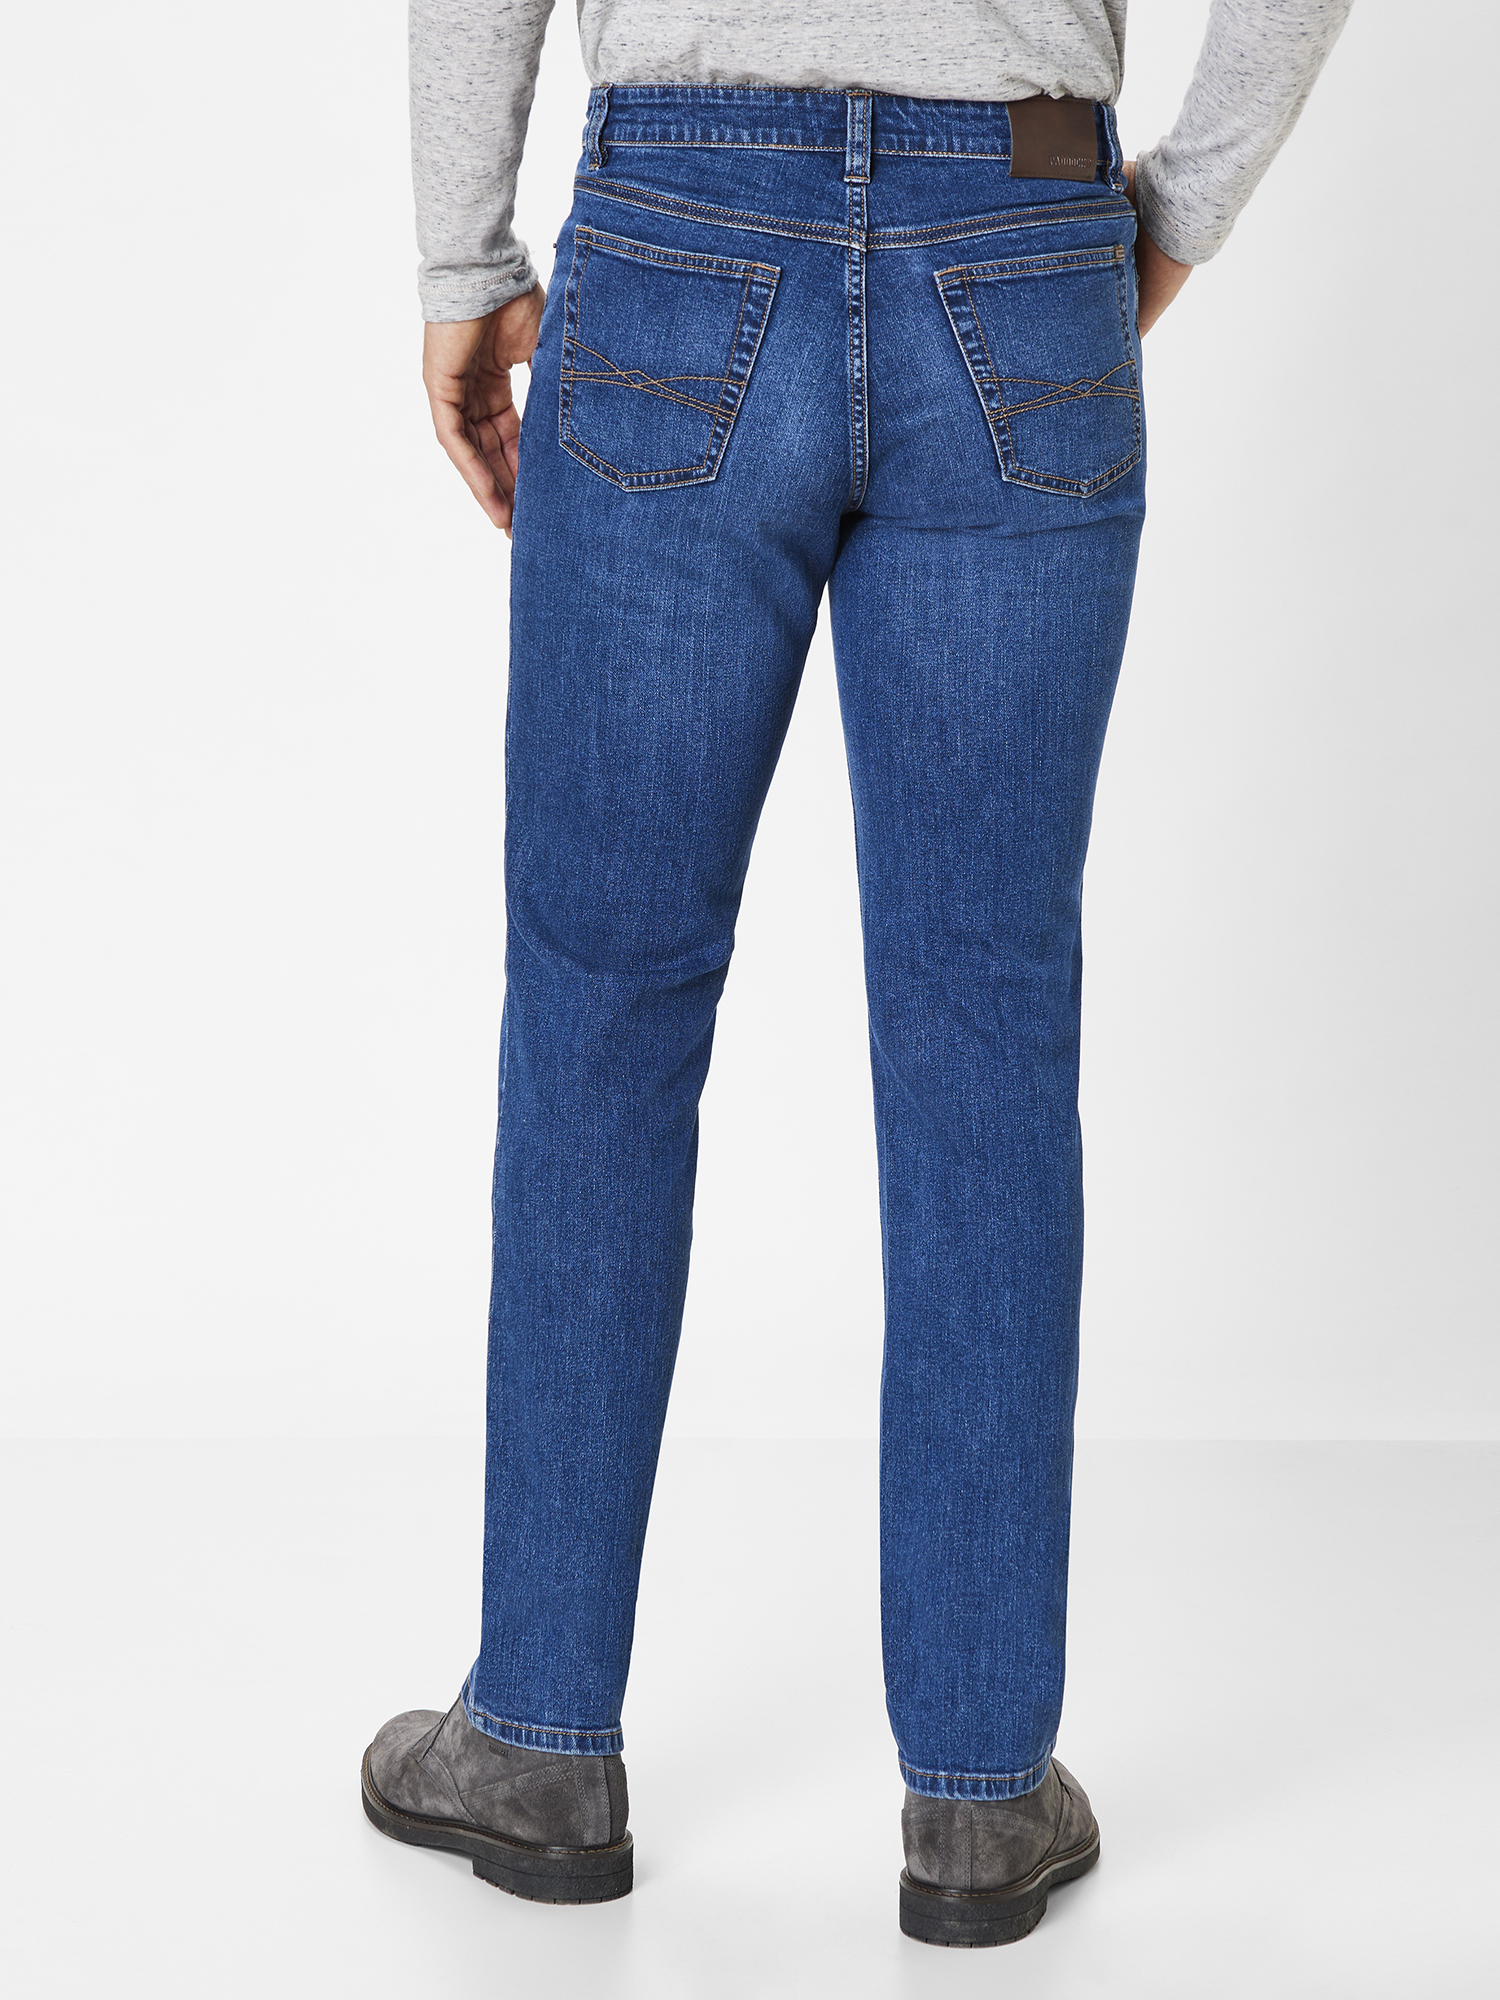 Paddock's Pipe Jeans Slim Fit deep blue moustache use